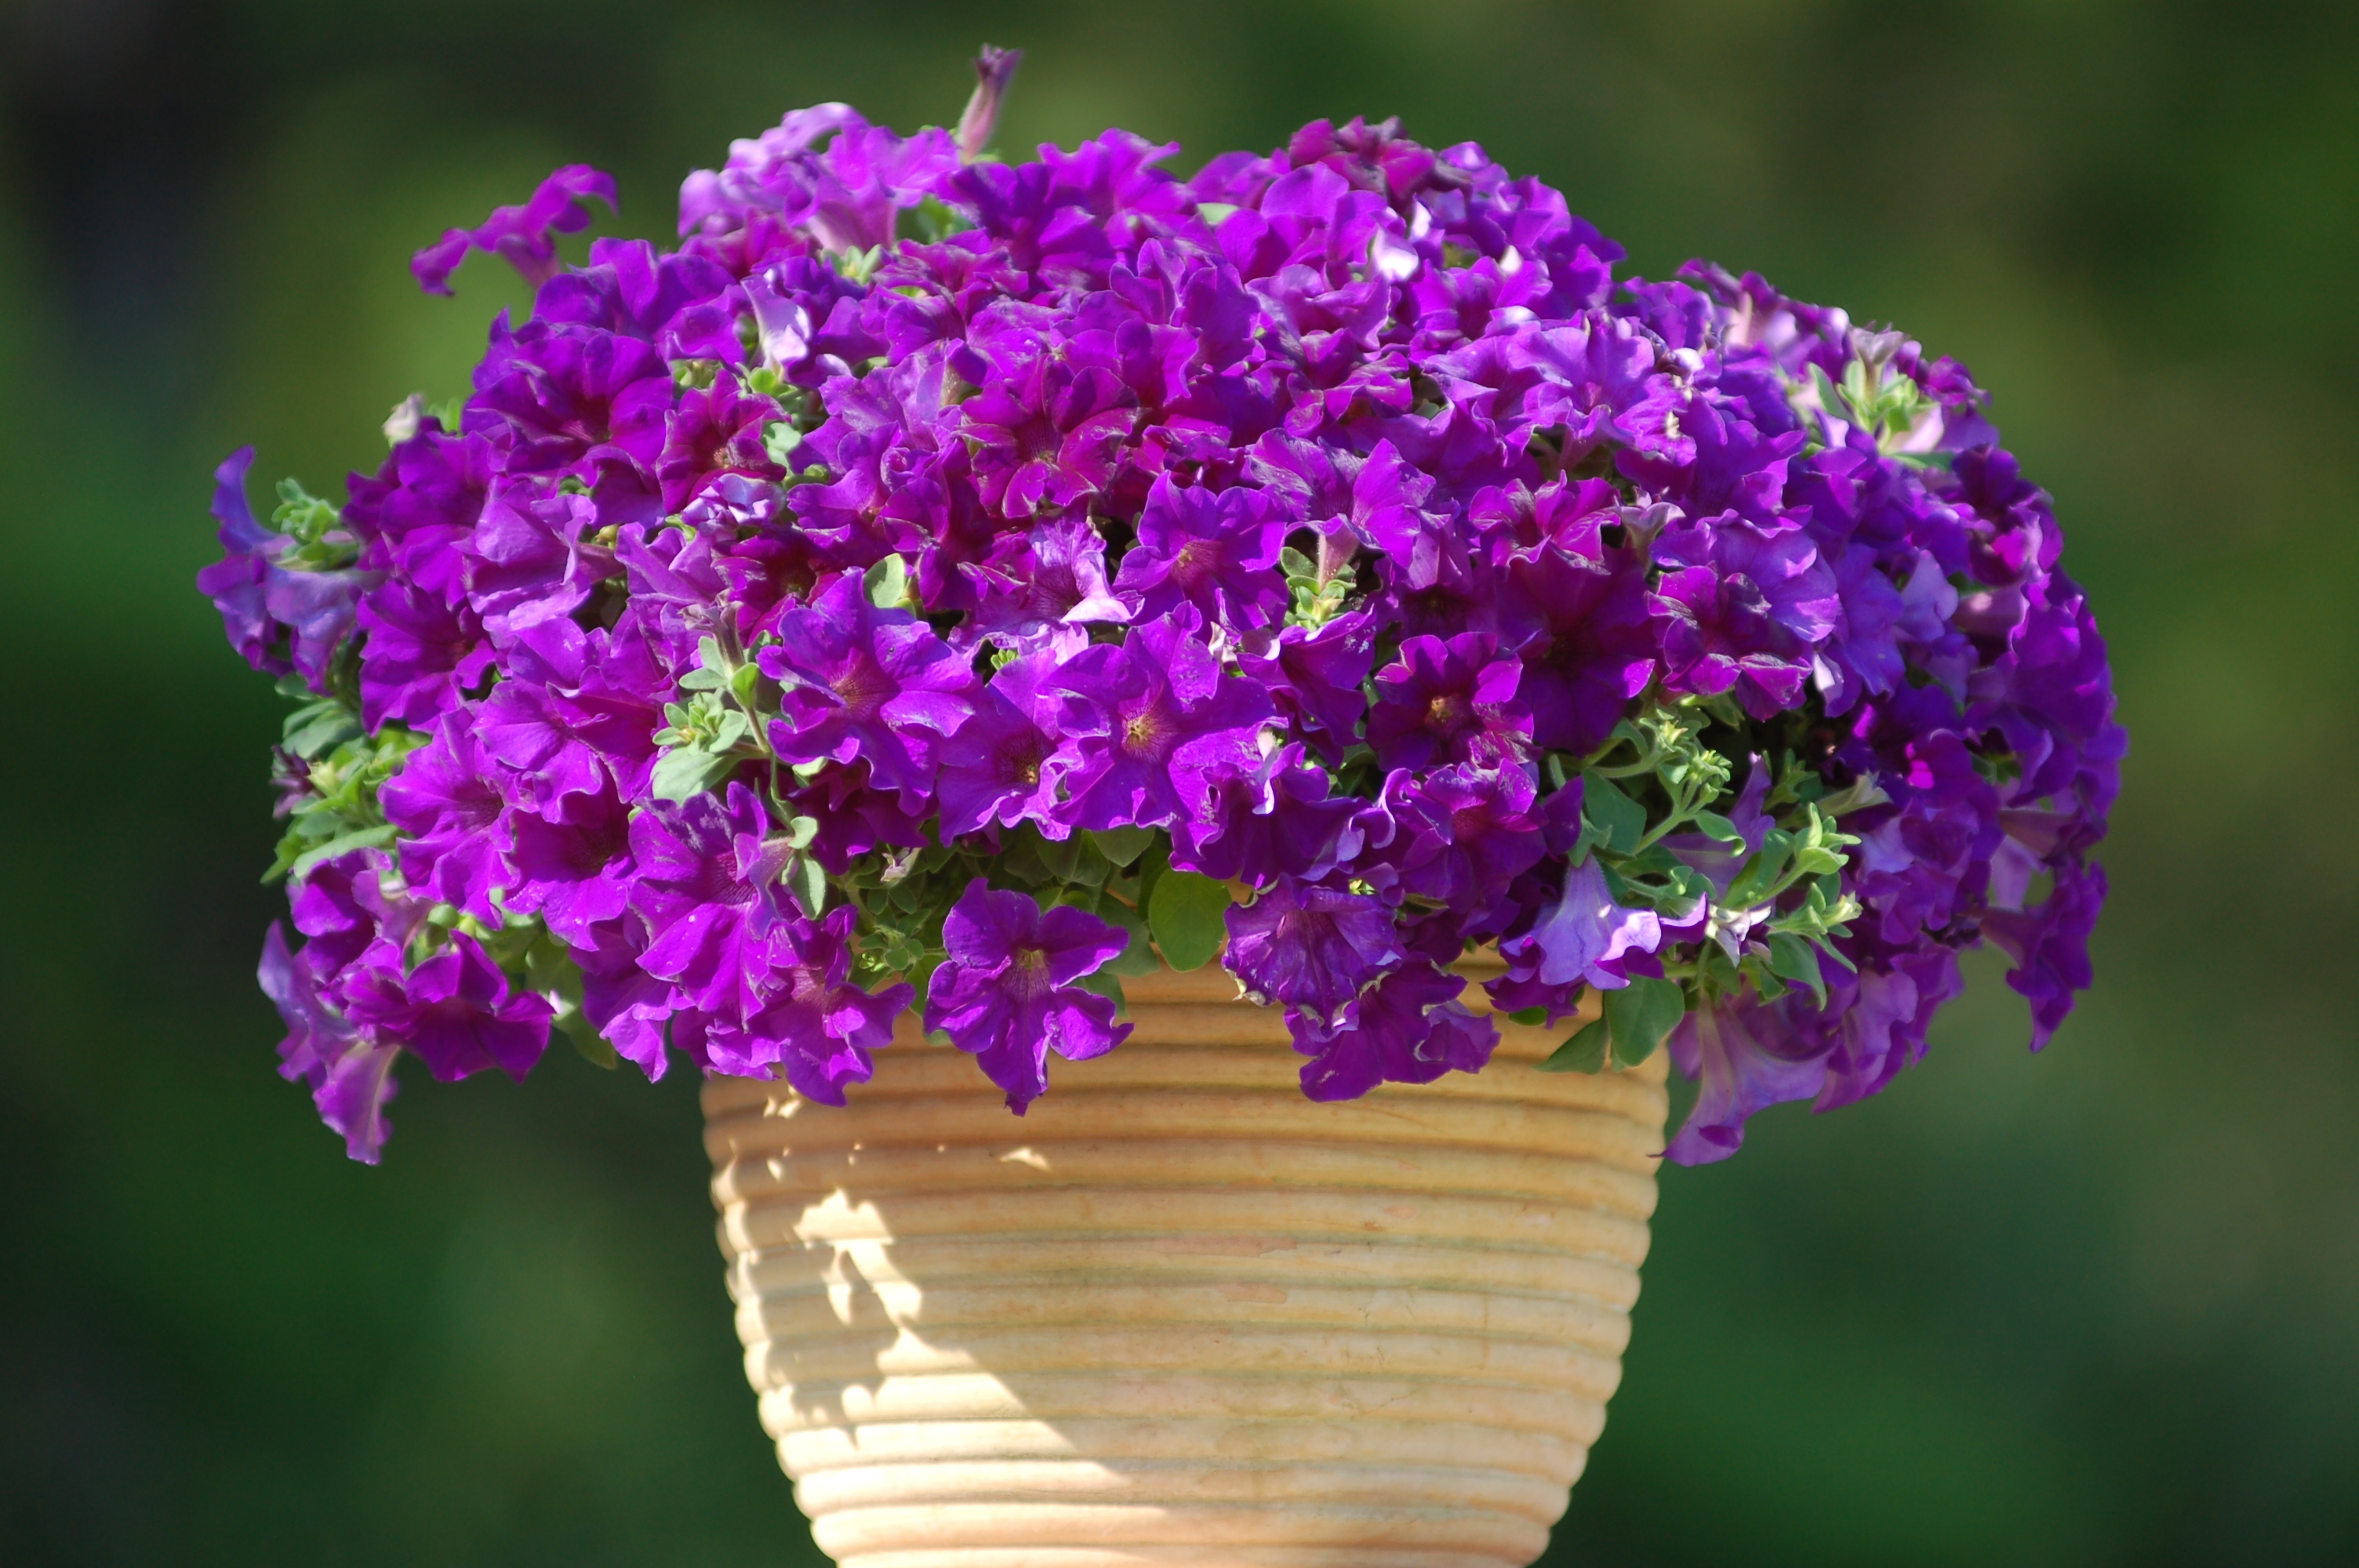 Purple Majesty is an outstanding trailing companion in a hanging basket or window box containing red and yellow blooming plants.